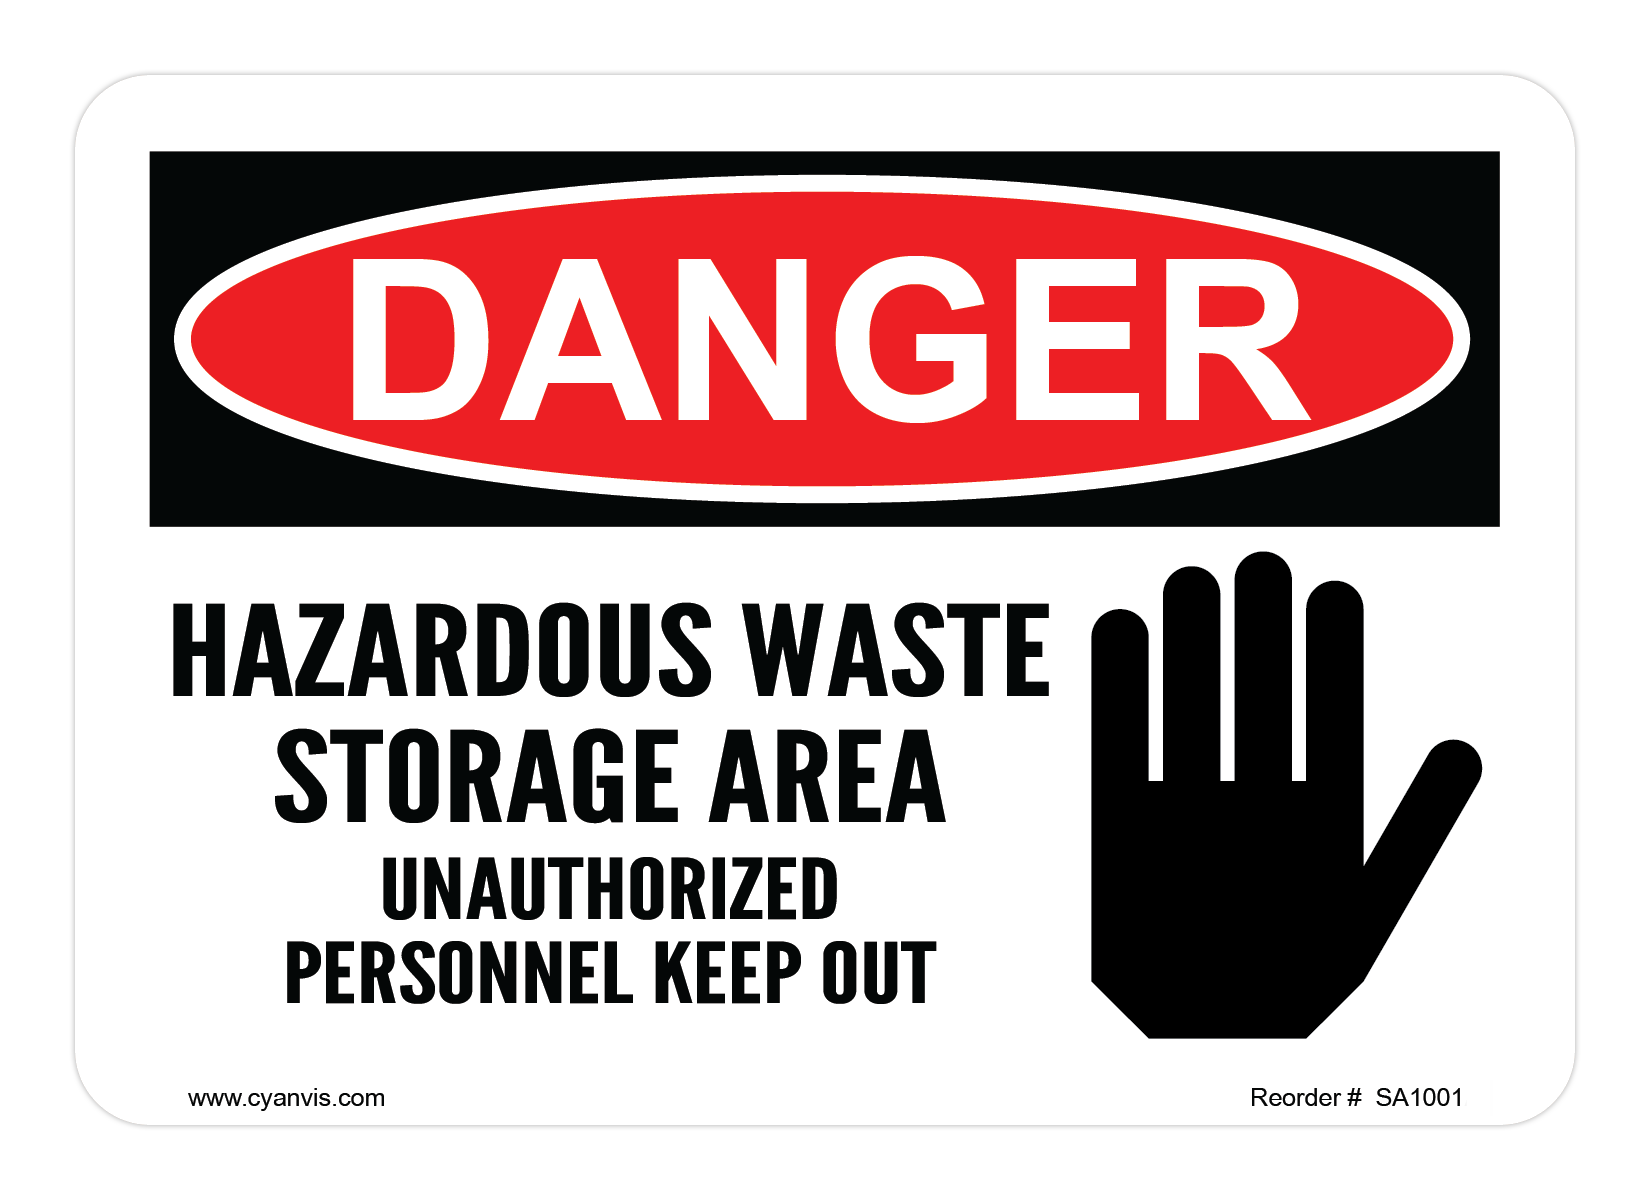 Safety Sign: Danger - HAZARDOUS WASTE STORAGE AREA UNAUTHORIZED PERSONNEL KEEP OUT - CYANvisuals